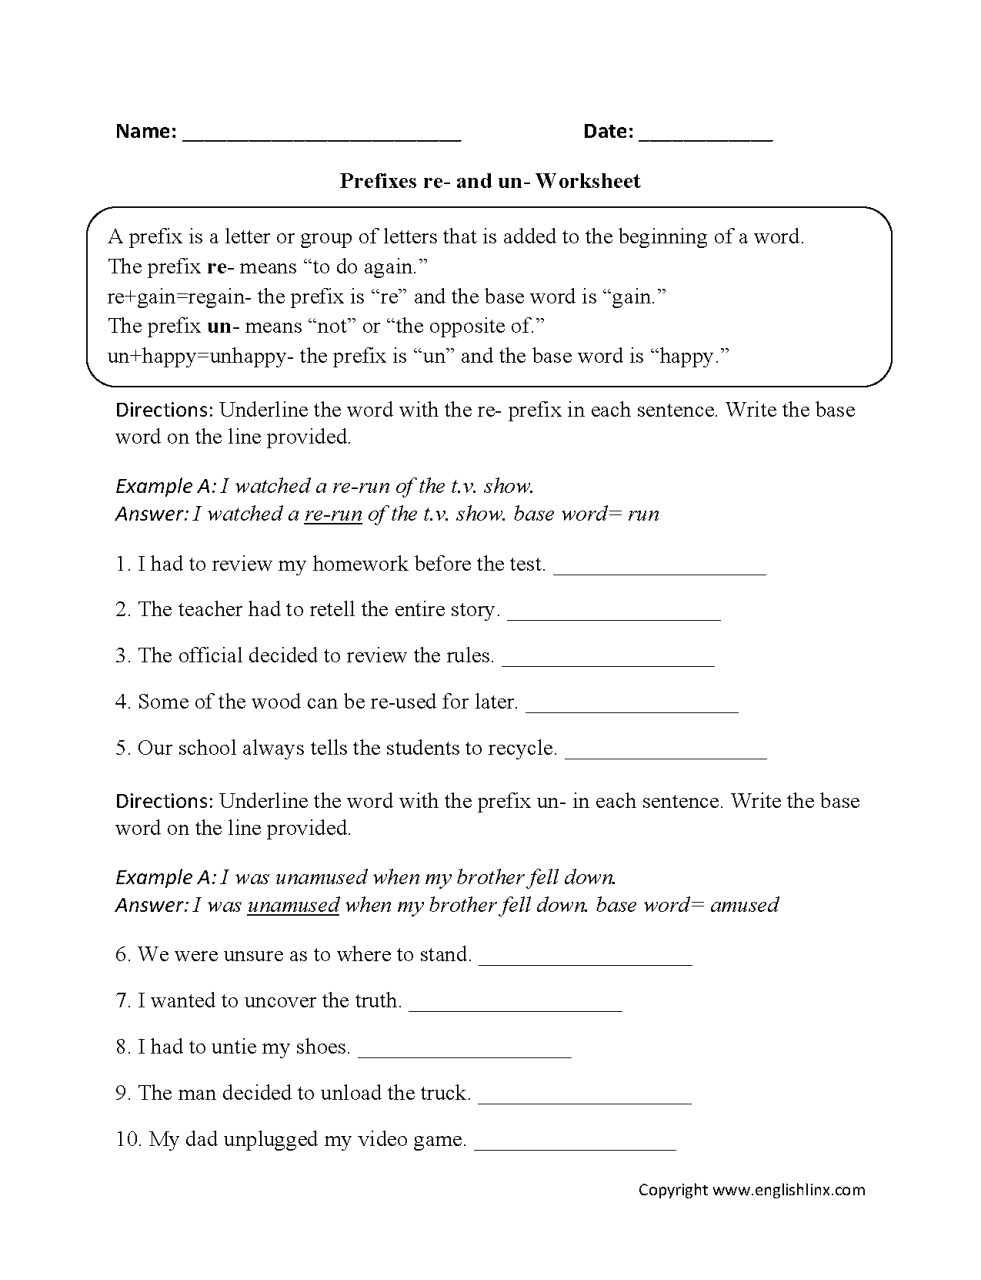 Prefixes Worksheets For Grade 4 With Answers